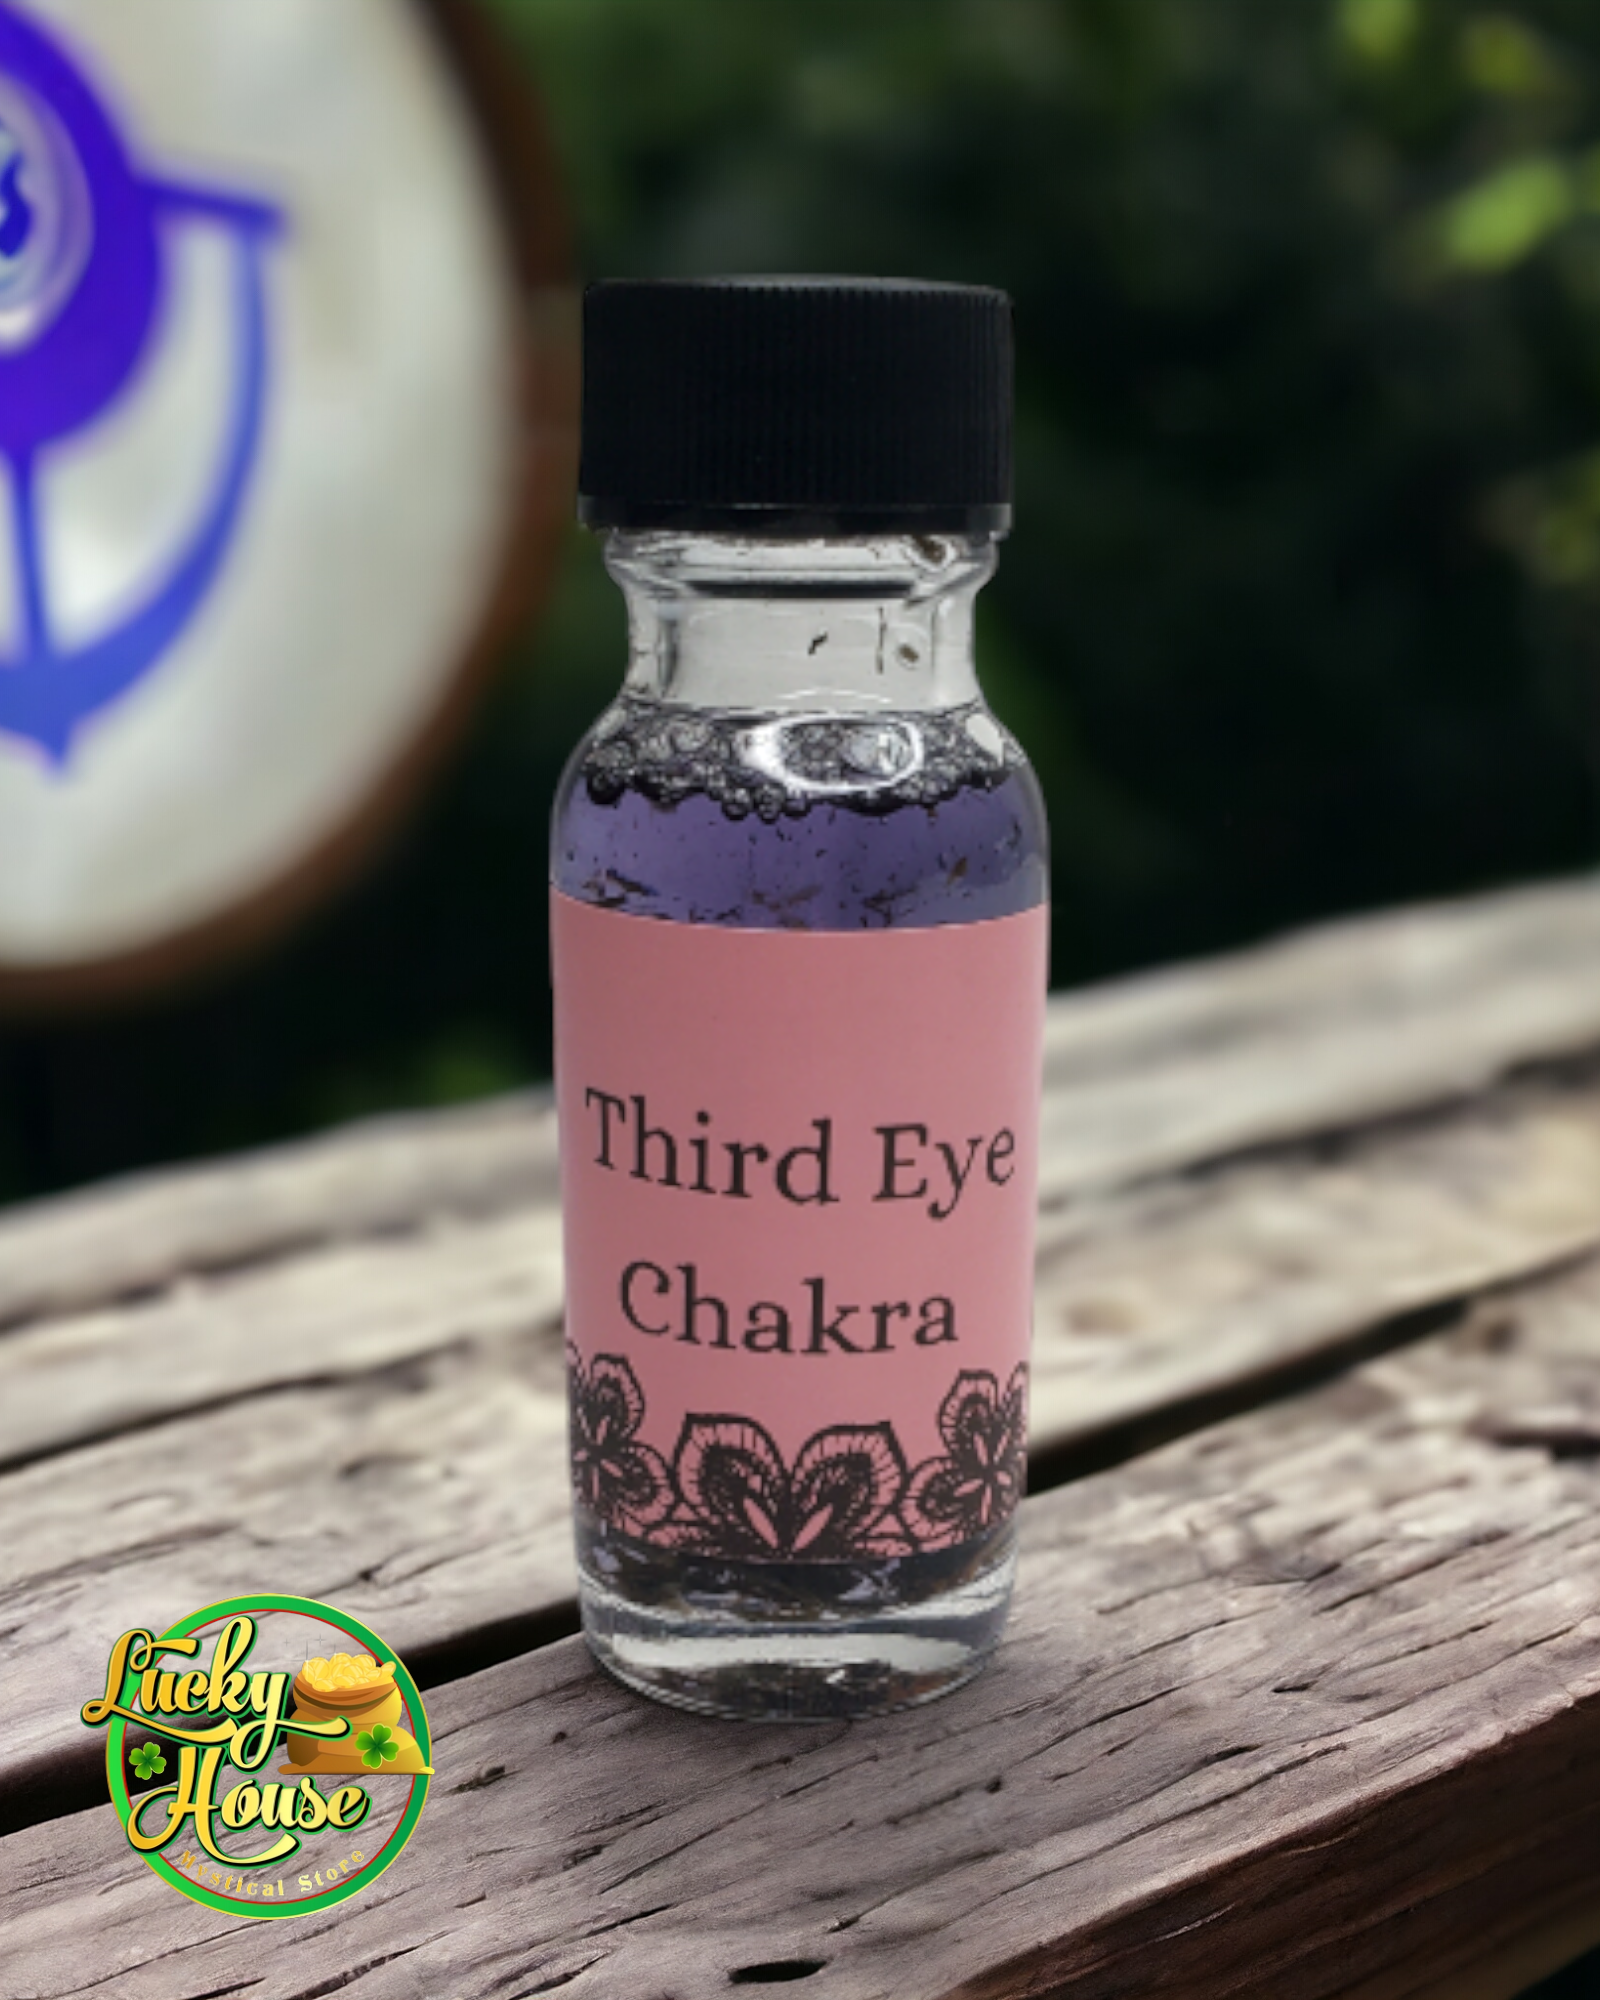 Third Eye Chakra oil bottle, fostering inner vision and intuition